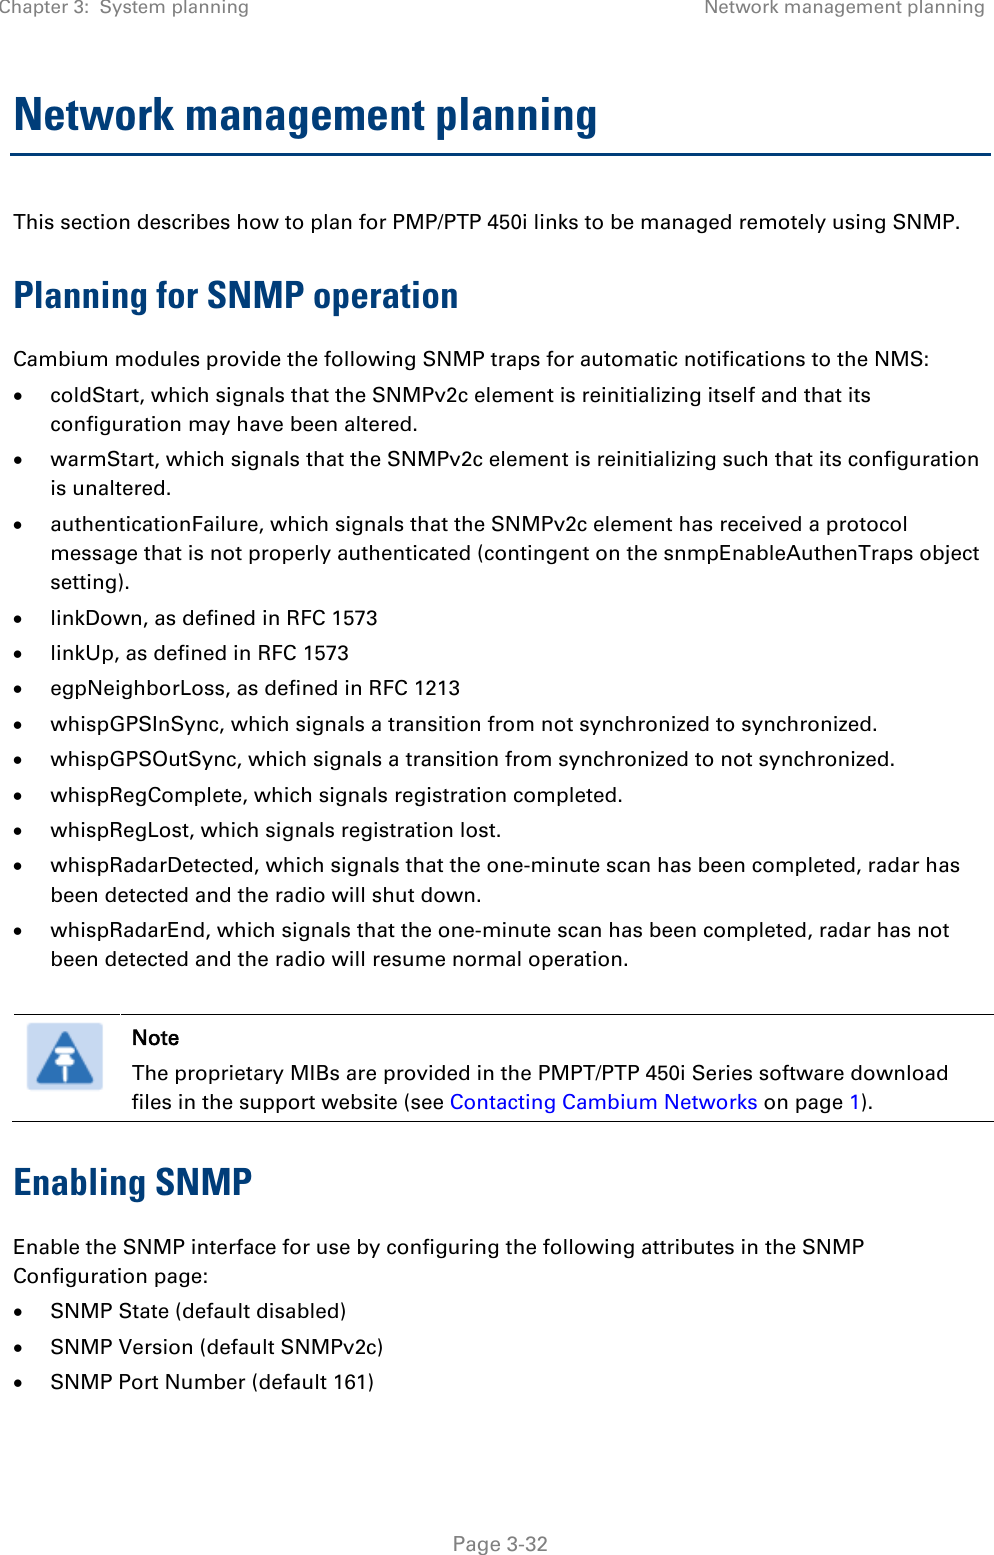 Chapter 3:  System planning Network management planning   Page 3-32 Network management planning This section describes how to plan for PMP/PTP 450i links to be managed remotely using SNMP. Planning for SNMP operation Cambium modules provide the following SNMP traps for automatic notifications to the NMS: • coldStart, which signals that the SNMPv2c element is reinitializing itself and that its configuration may have been altered. • warmStart, which signals that the SNMPv2c element is reinitializing such that its configuration is unaltered. • authenticationFailure, which signals that the SNMPv2c element has received a protocol message that is not properly authenticated (contingent on the snmpEnableAuthenTraps object setting). • linkDown, as defined in RFC 1573 • linkUp, as defined in RFC 1573 • egpNeighborLoss, as defined in RFC 1213 • whispGPSInSync, which signals a transition from not synchronized to synchronized. • whispGPSOutSync, which signals a transition from synchronized to not synchronized. • whispRegComplete, which signals registration completed.  • whispRegLost, which signals registration lost.  • whispRadarDetected, which signals that the one-minute scan has been completed, radar has been detected and the radio will shut down.  • whispRadarEnd, which signals that the one-minute scan has been completed, radar has not been detected and the radio will resume normal operation.    Note The proprietary MIBs are provided in the PMPT/PTP 450i Series software download files in the support website (see Contacting Cambium Networks on page 1). Enabling SNMP Enable the SNMP interface for use by configuring the following attributes in the SNMP Configuration page: • SNMP State (default disabled) • SNMP Version (default SNMPv2c) • SNMP Port Number (default 161) 